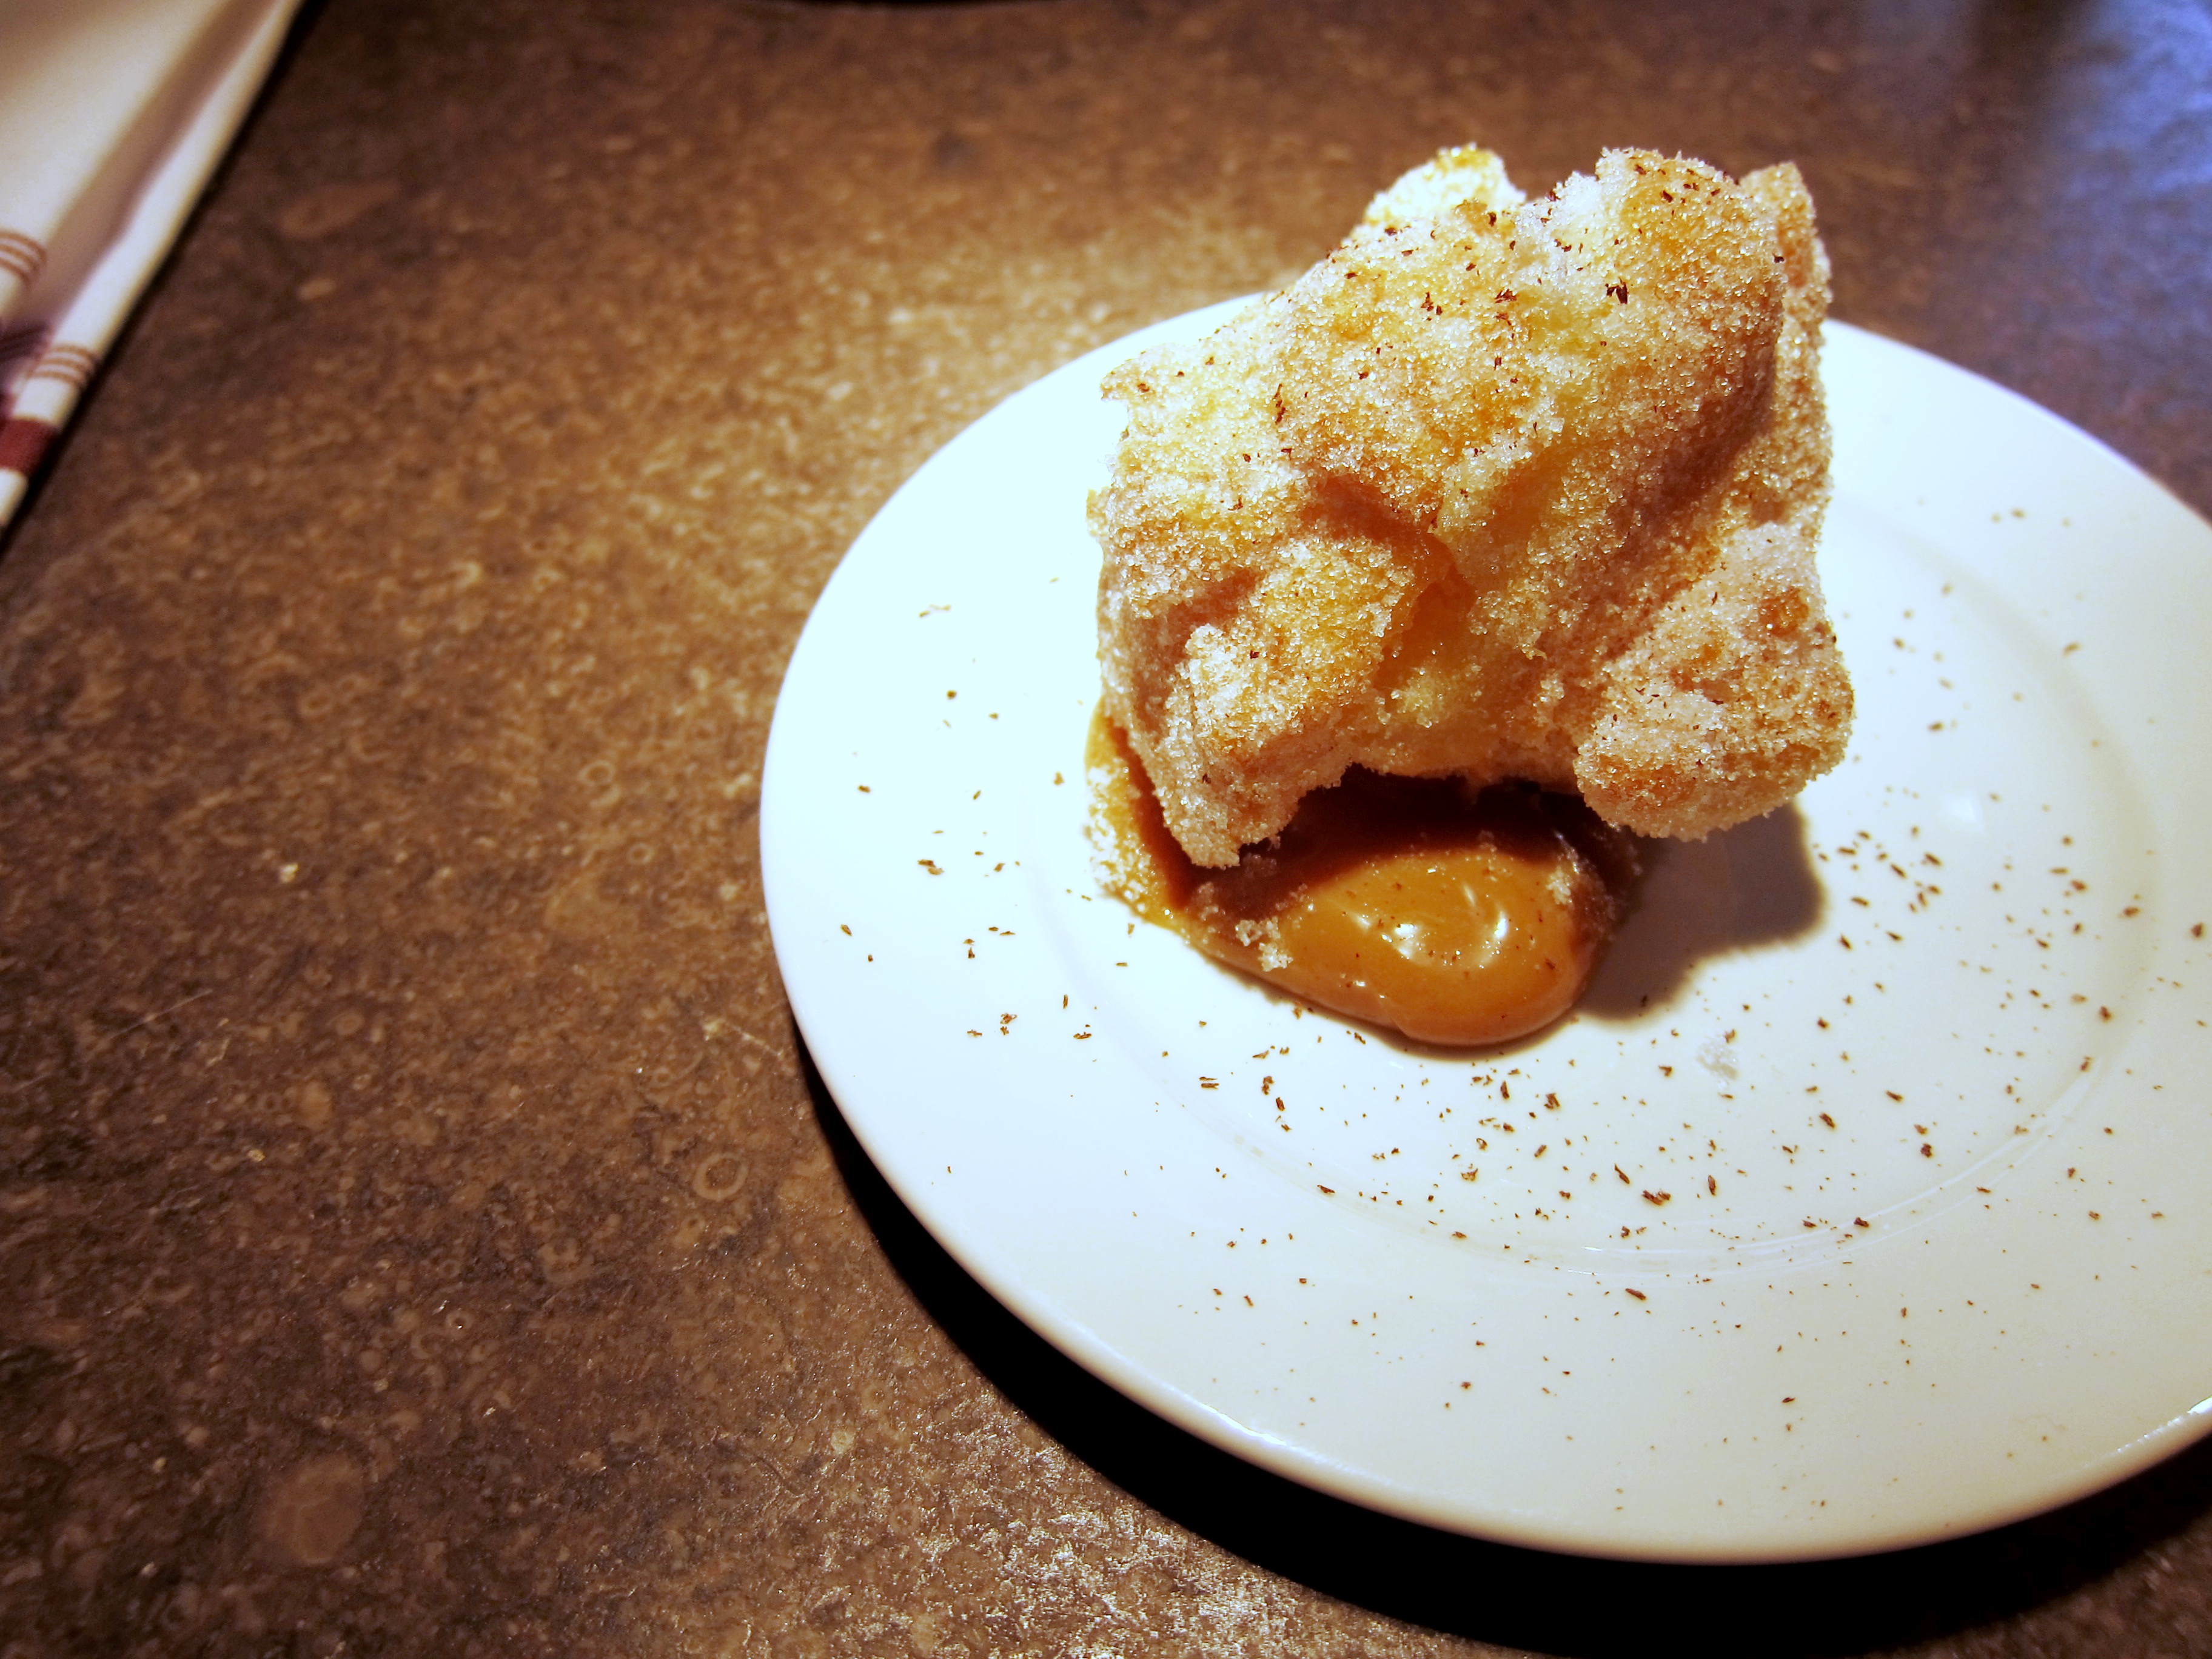 Doughnut sprinkled with cocoa shavings and sugar, served with butter caramel